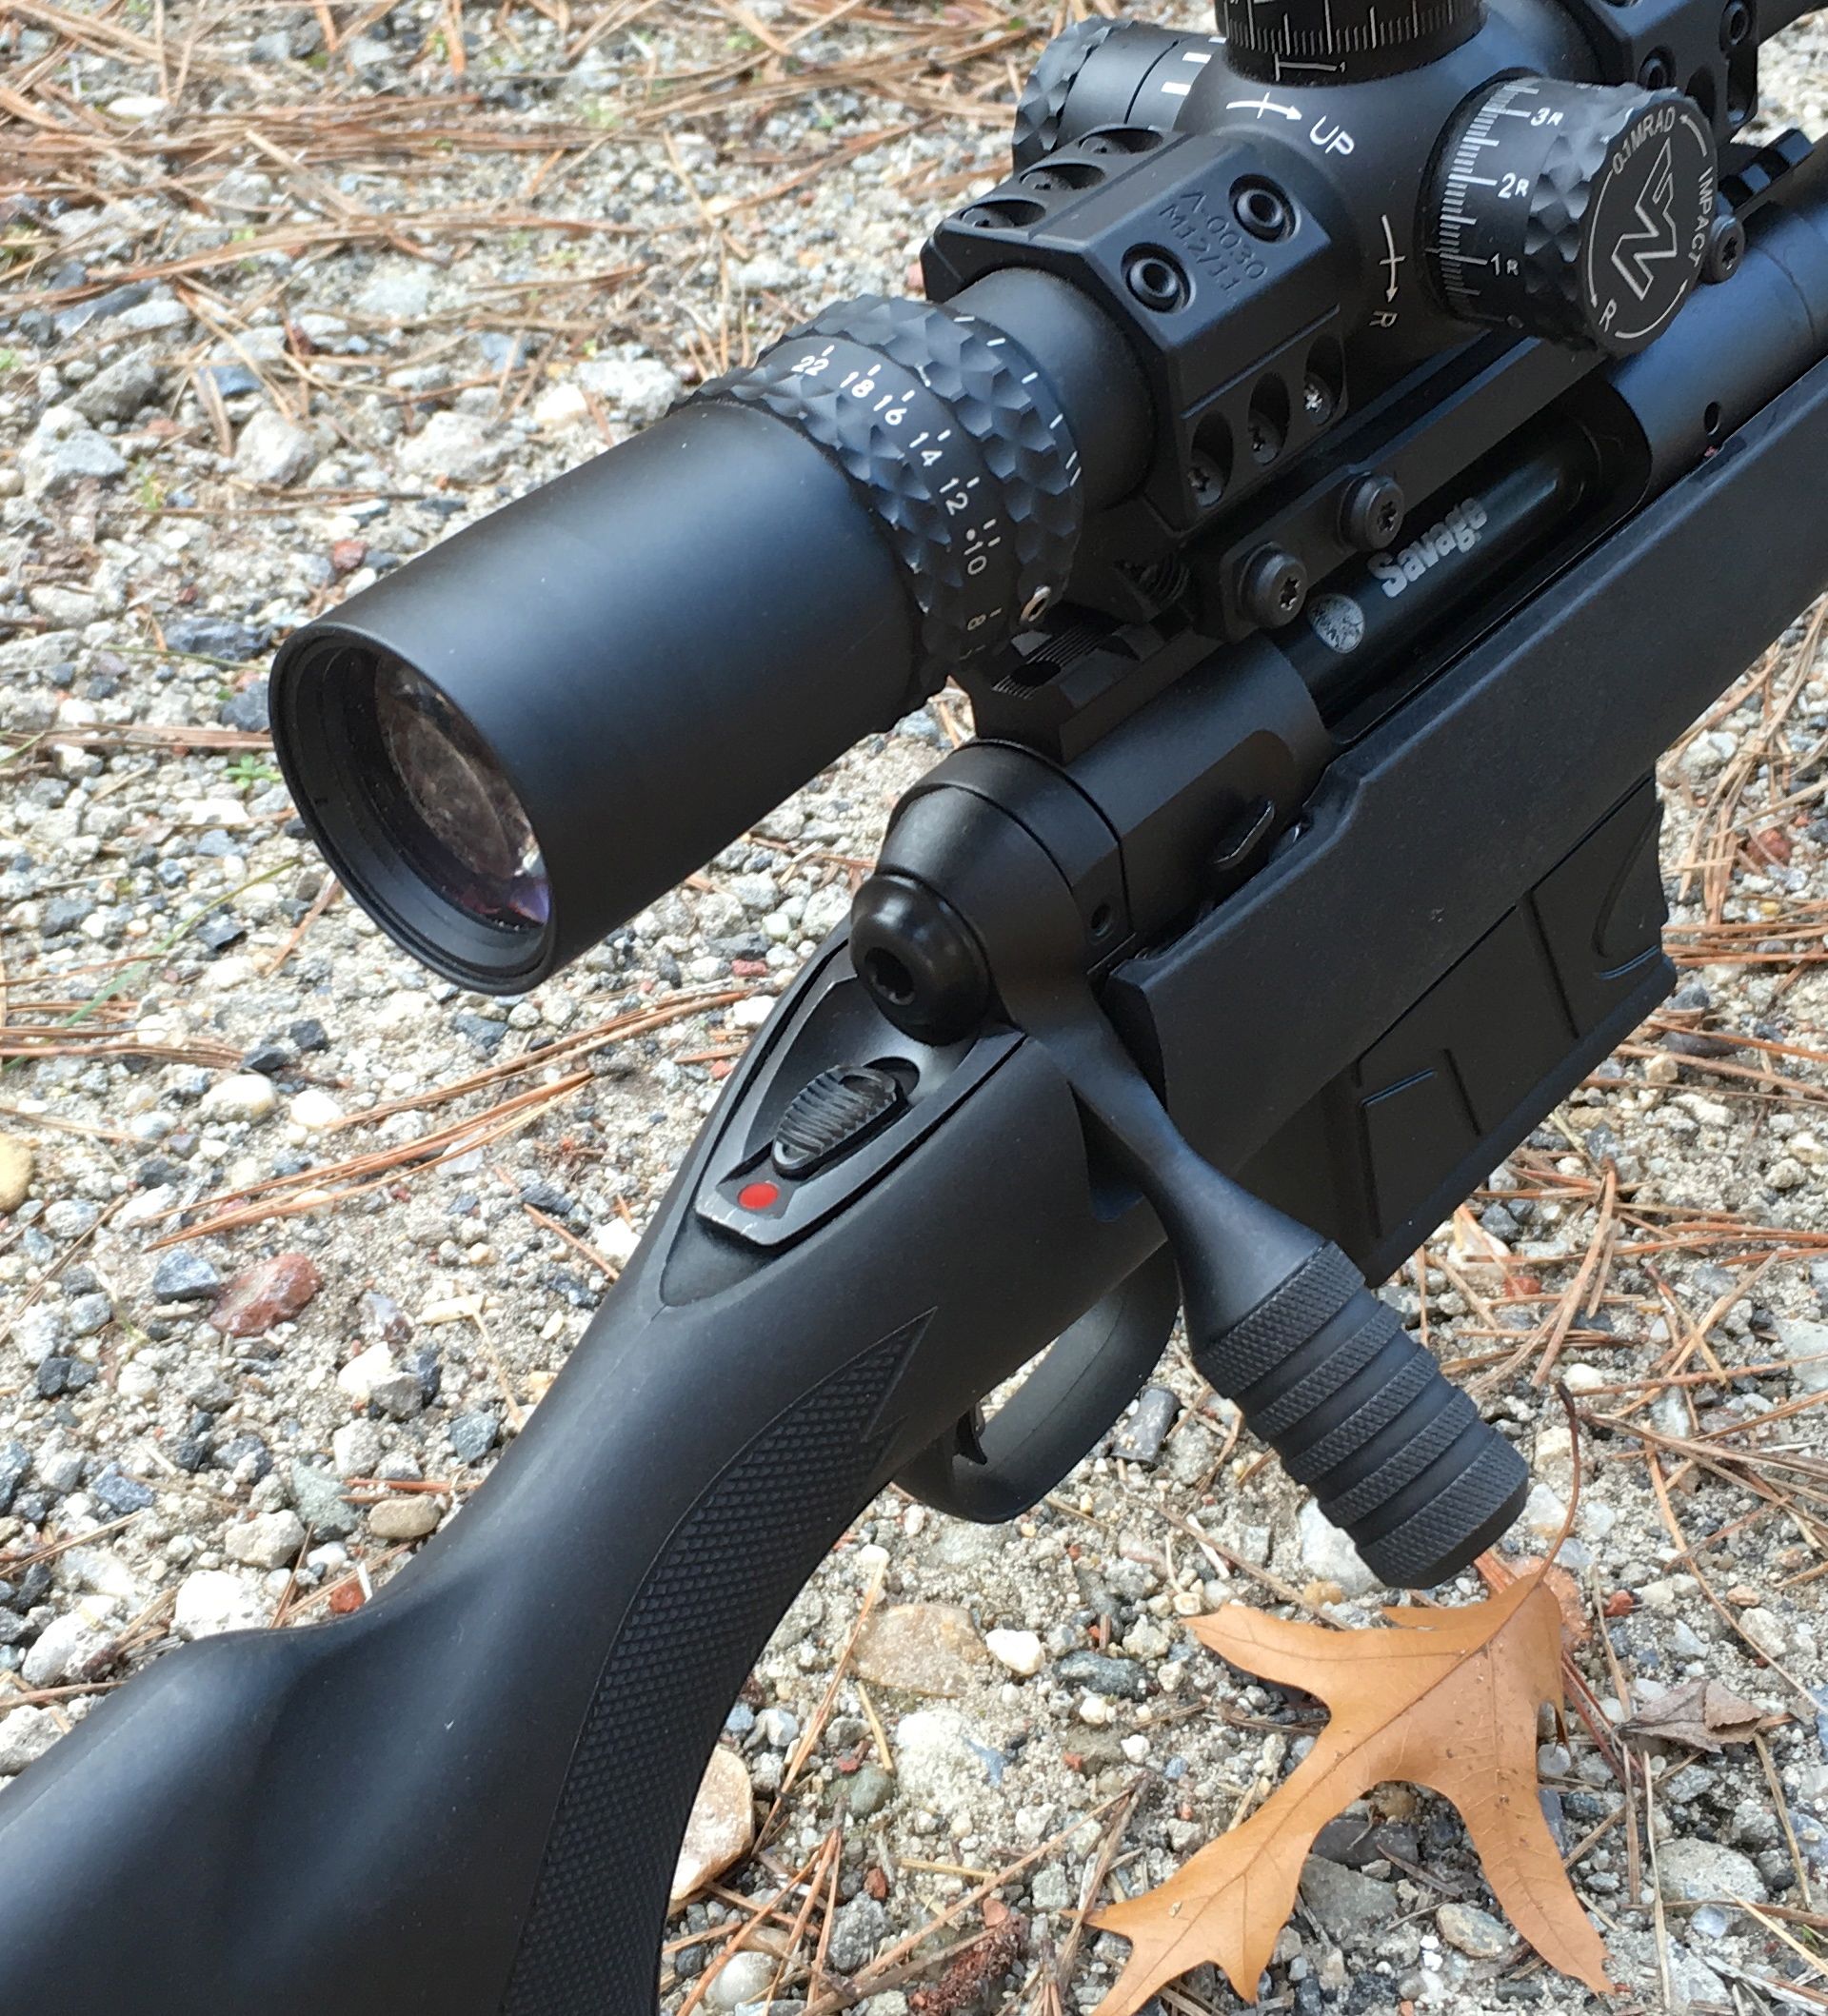 savage-model-10-fcp-sr-review-rifleshooter